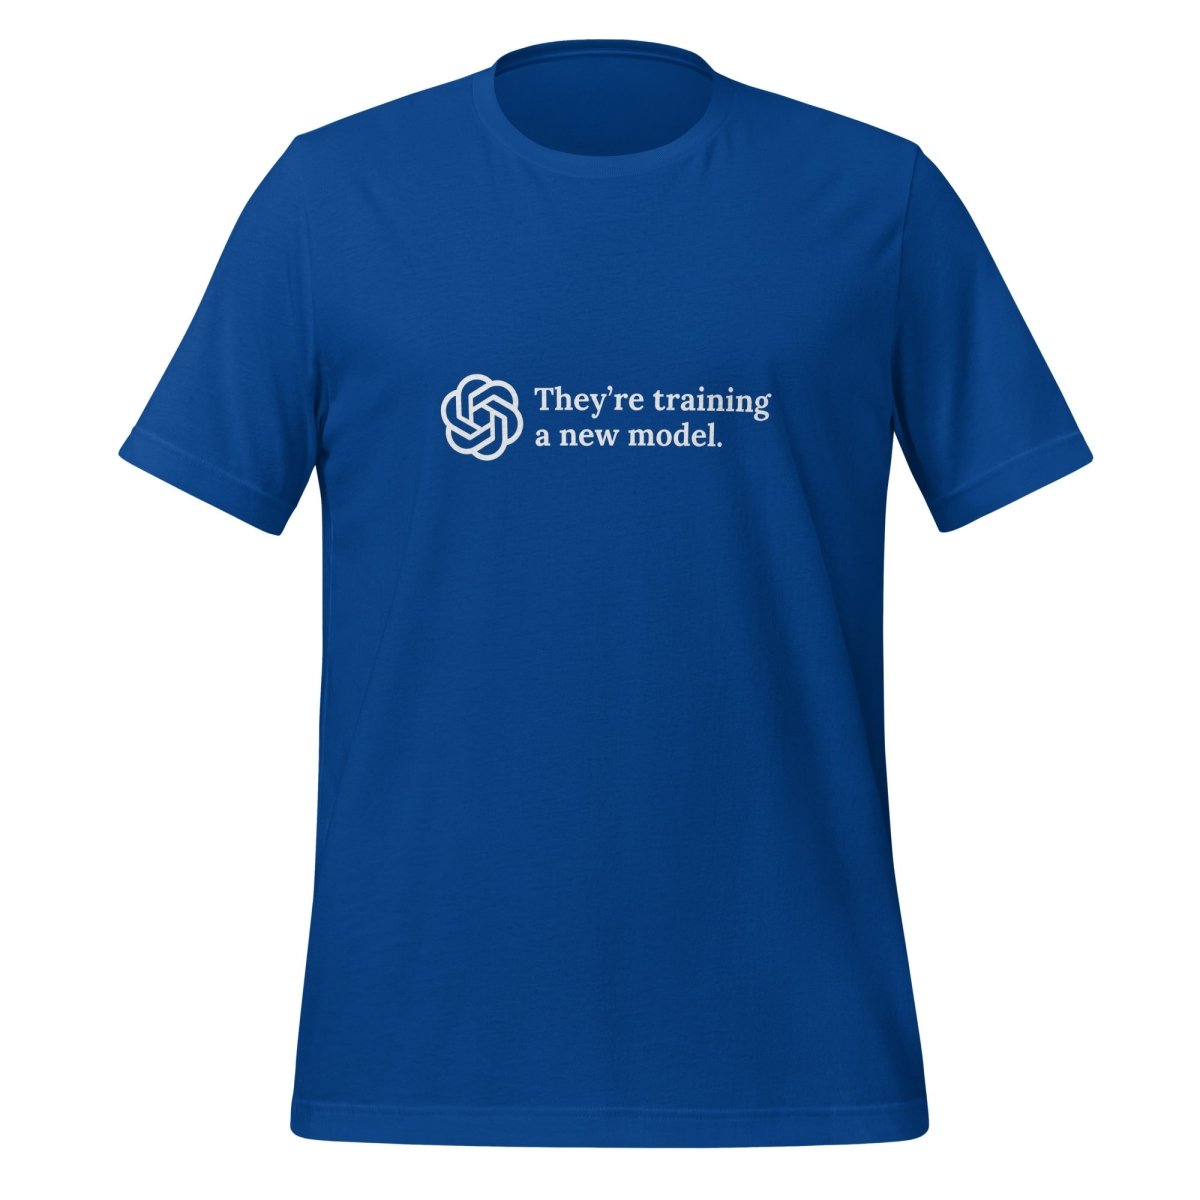 They're training a new model. T - Shirt (unisex) - True Royal - AI Store